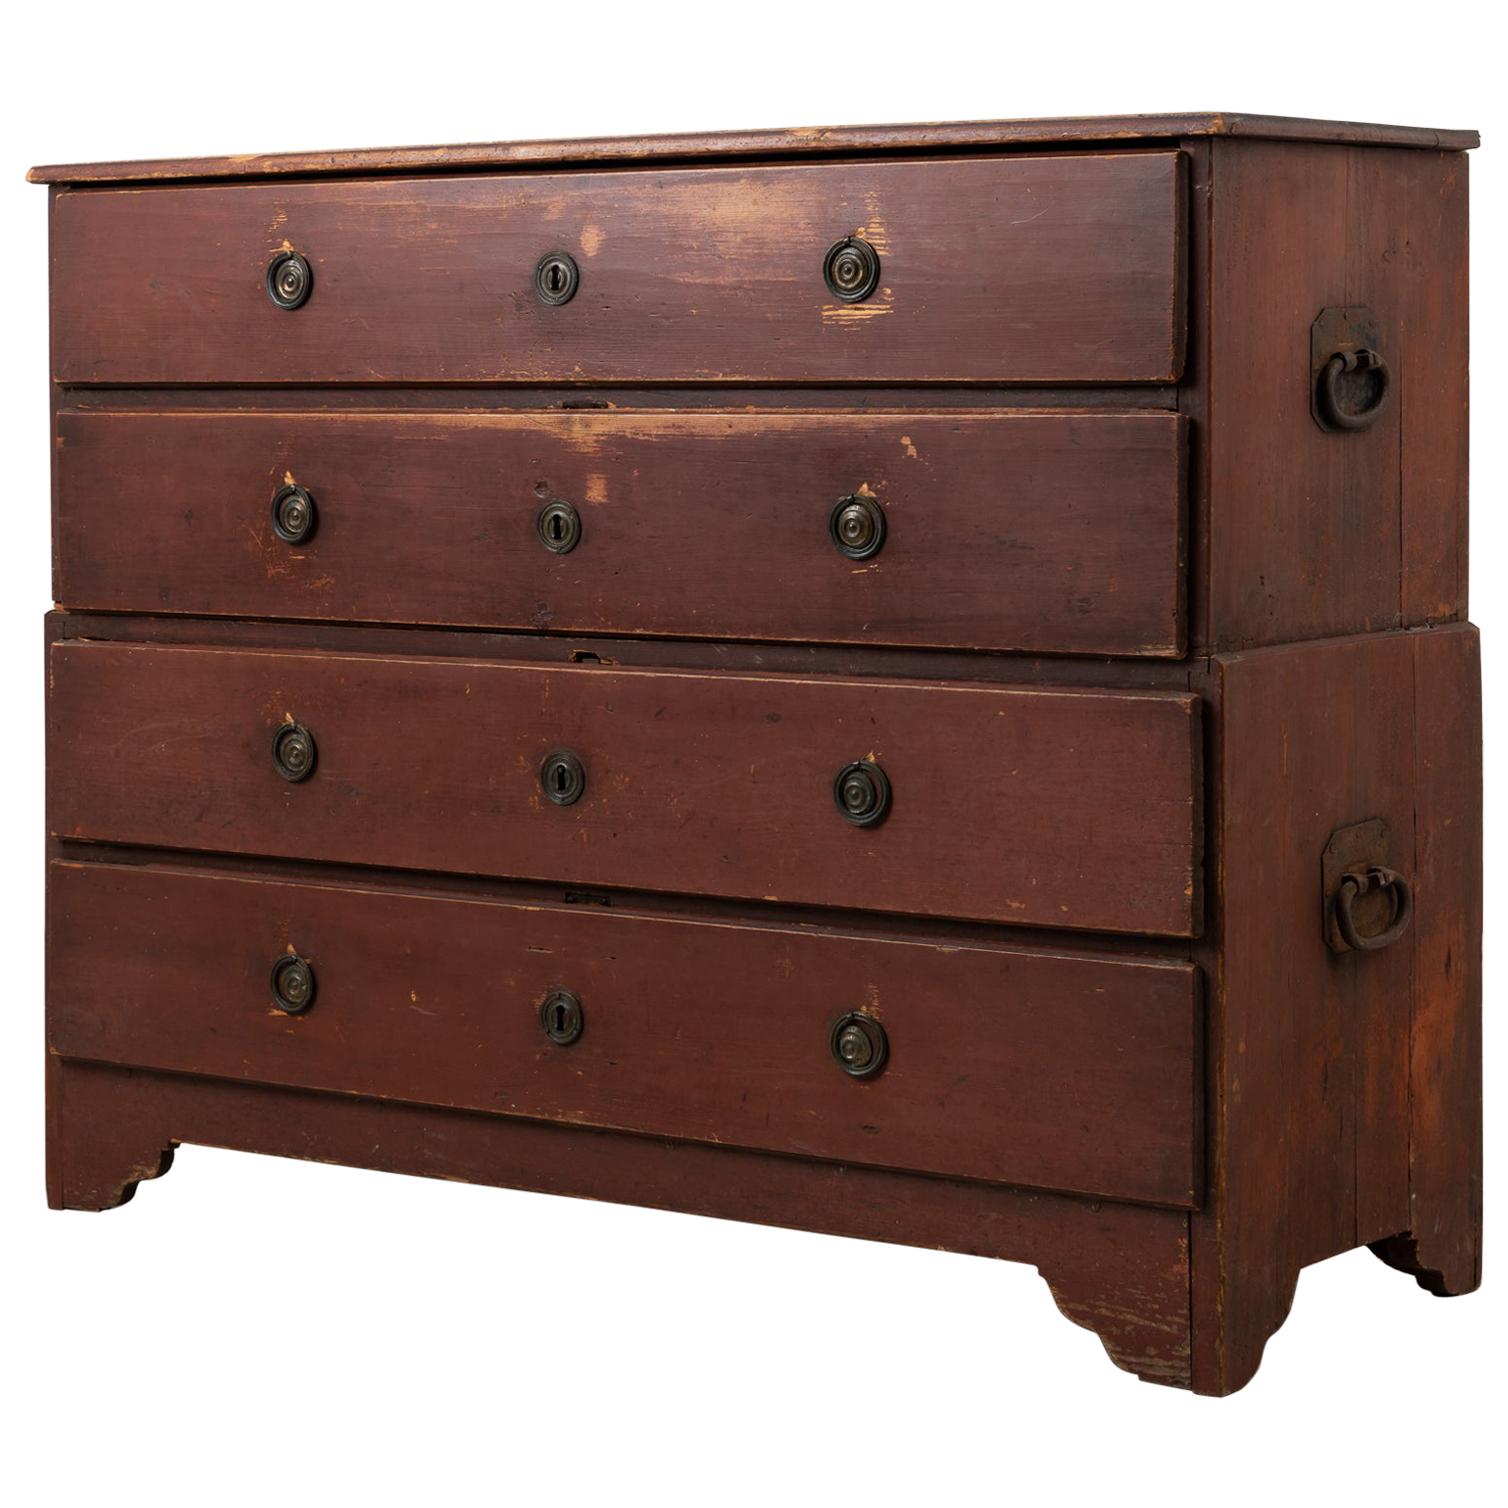 Late 1700s Swedish Neoclassical Chest of Drawers For Sale